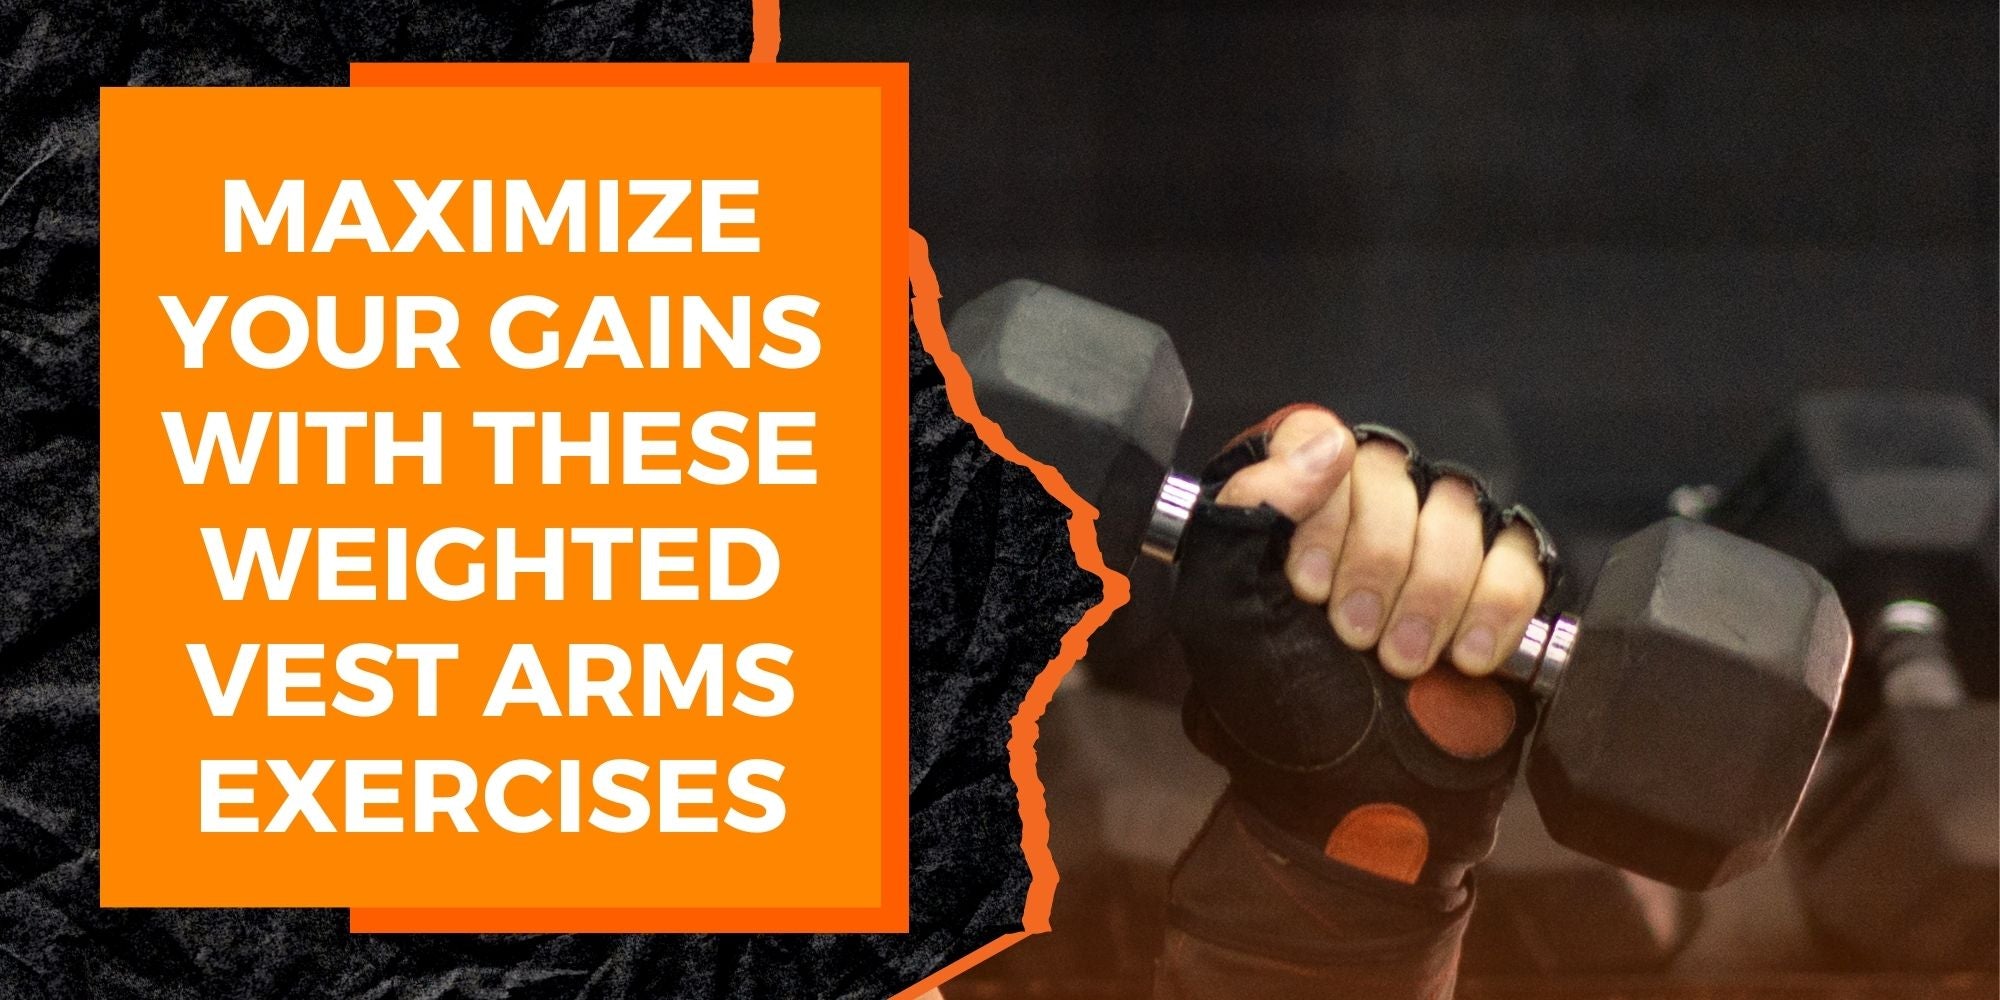 Maximize Your Gains with These Weighted Vest Arms Exercises